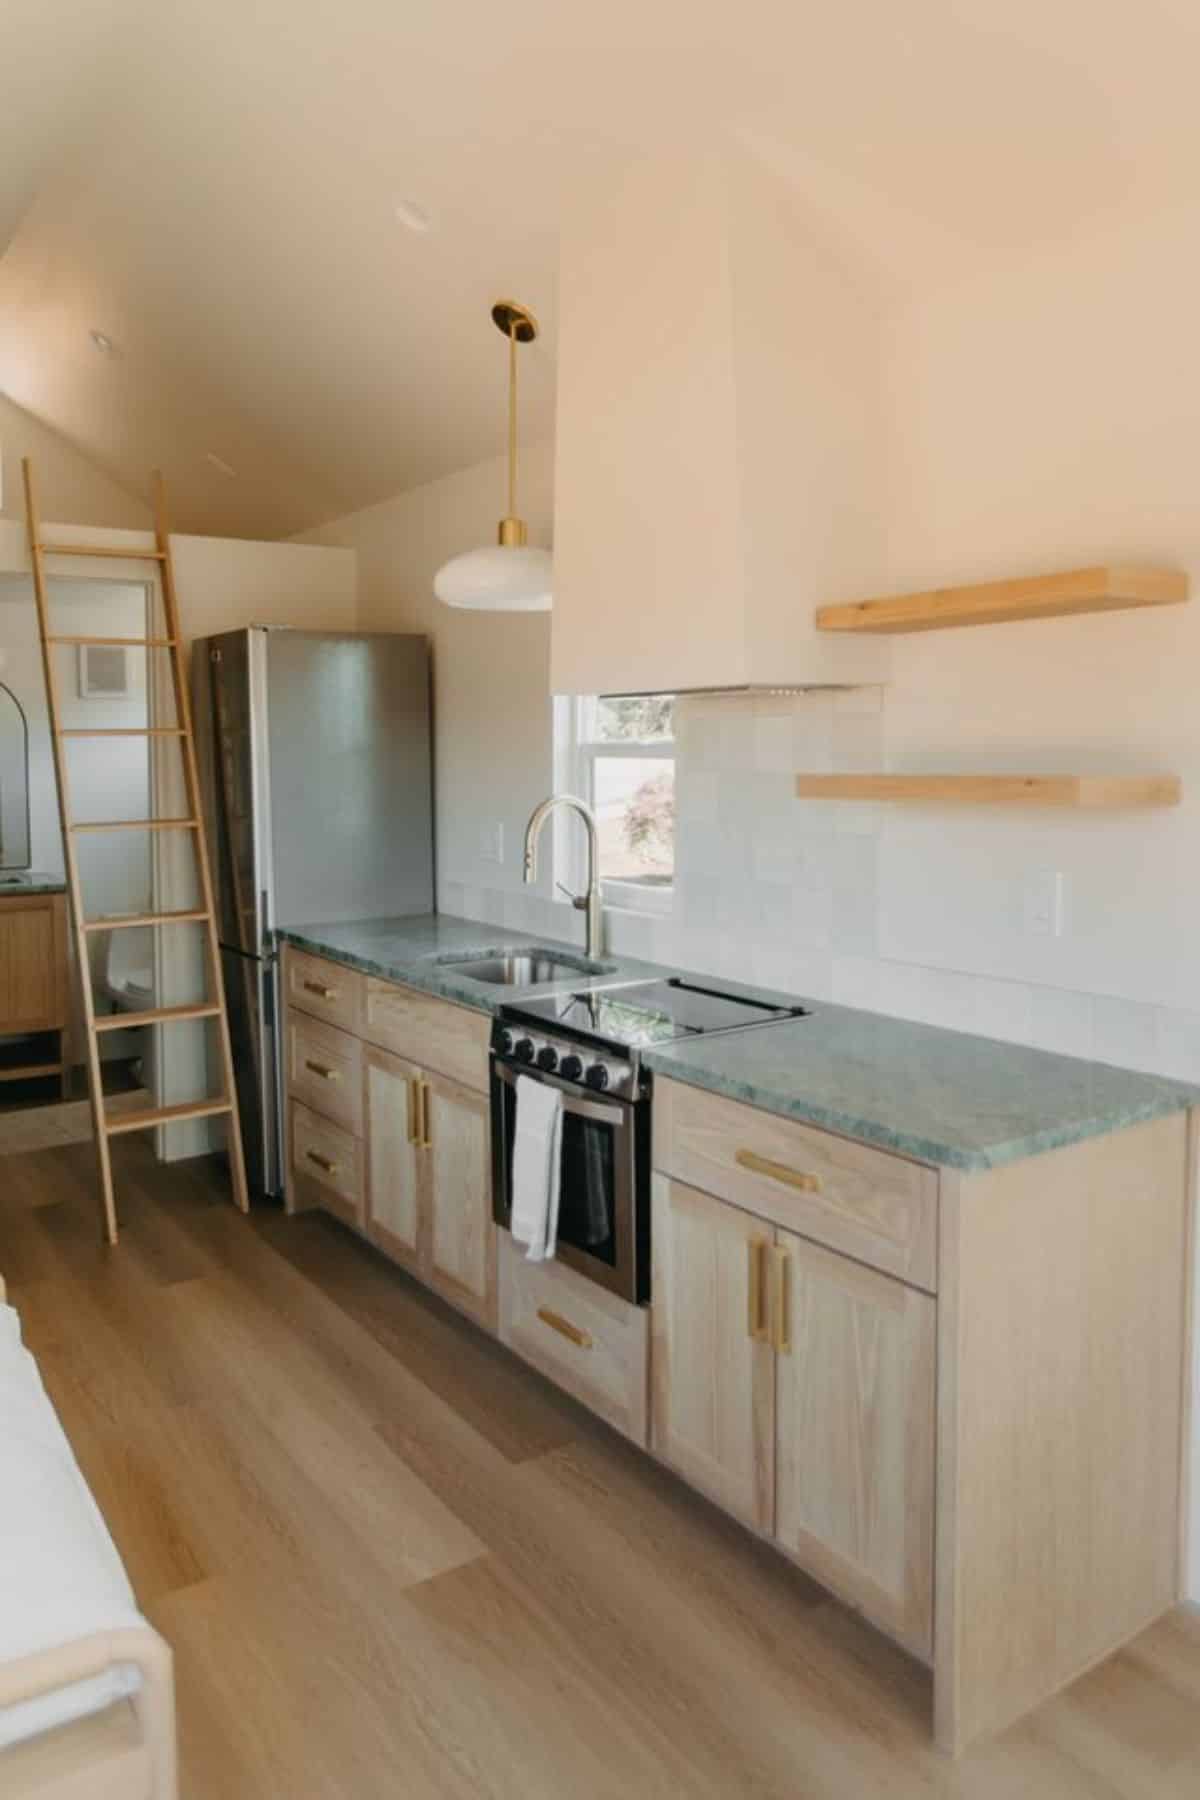 Kitchen area of 30' RV Certified Tiny House